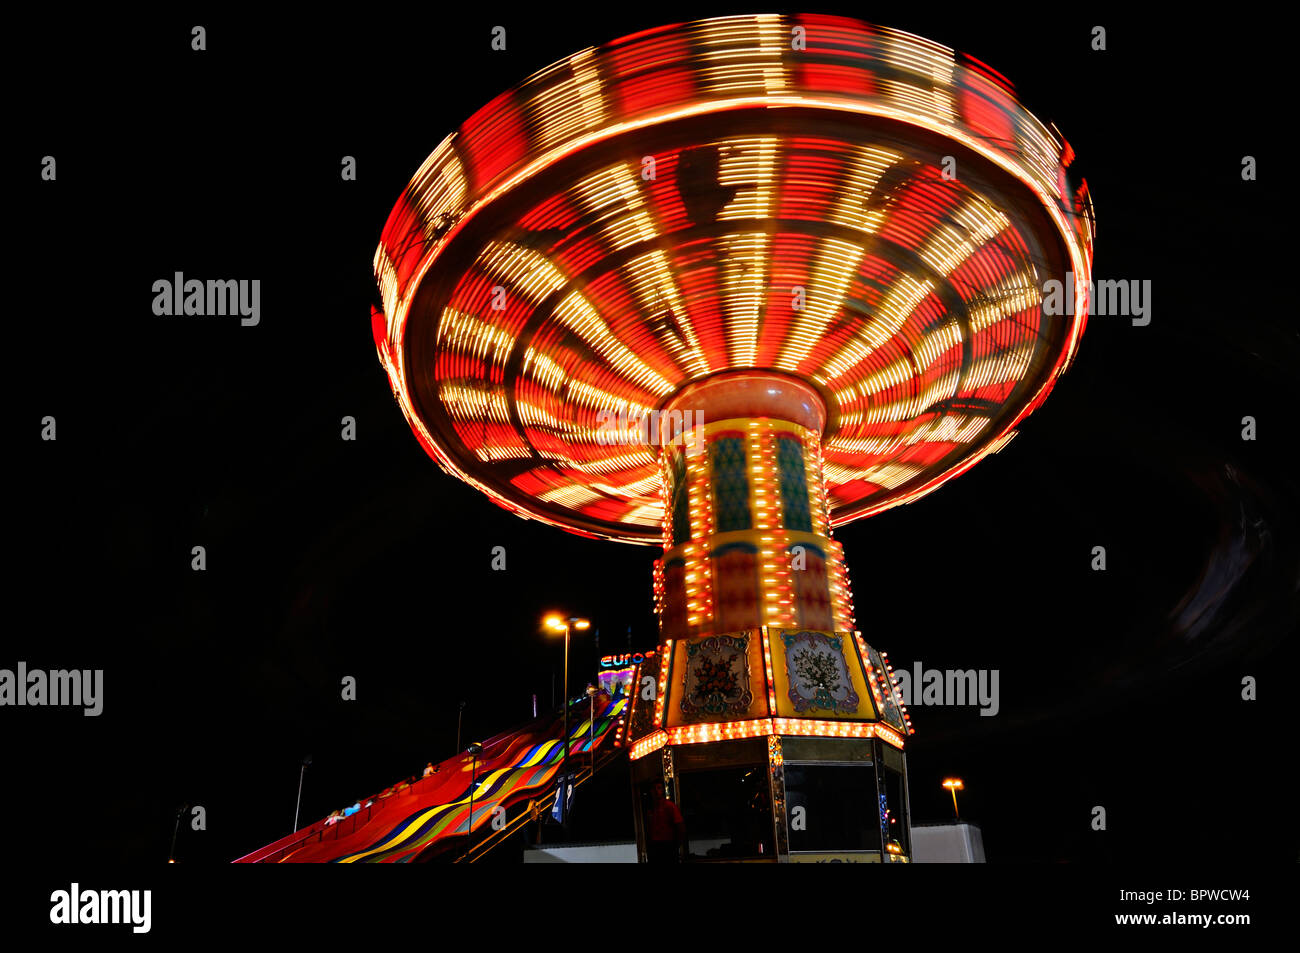 Red and white light streaks at night from the Swing ride at the Toronto Canadian National Exhibition CNE funfair midway fairgrounds Stock Photo